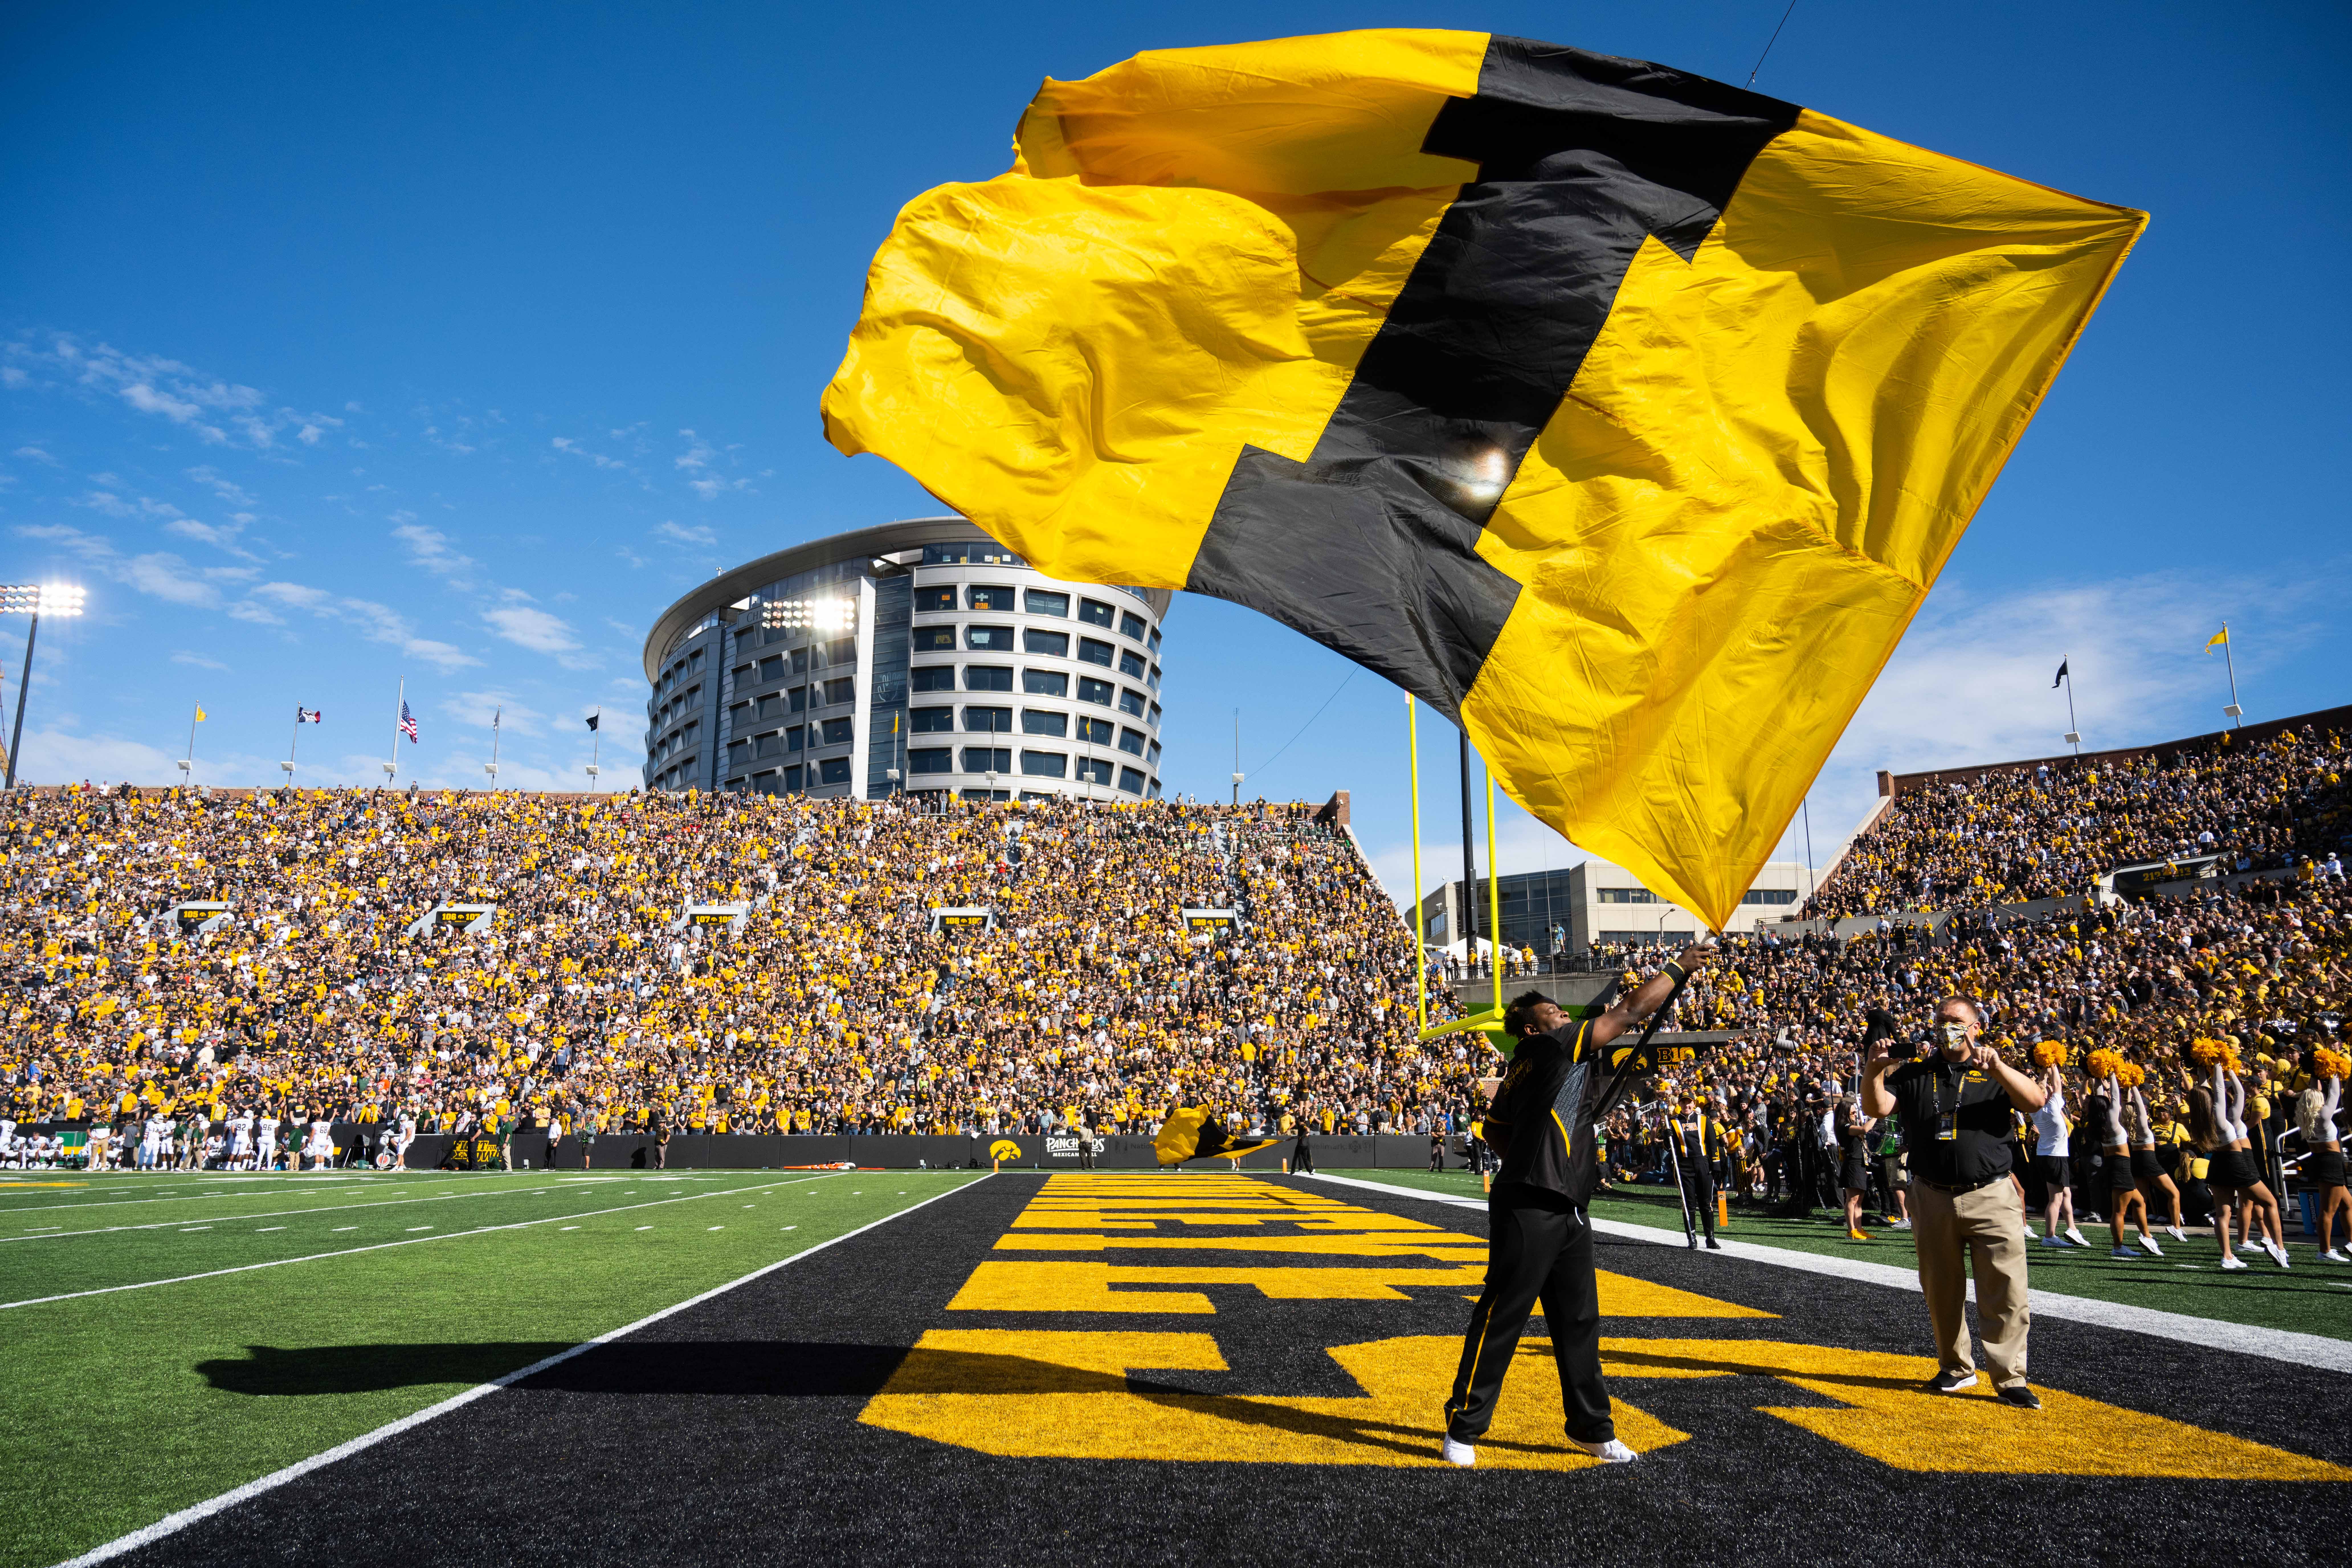 Iowa home game with the I flag waving in front of the crowd and Children's Hospital